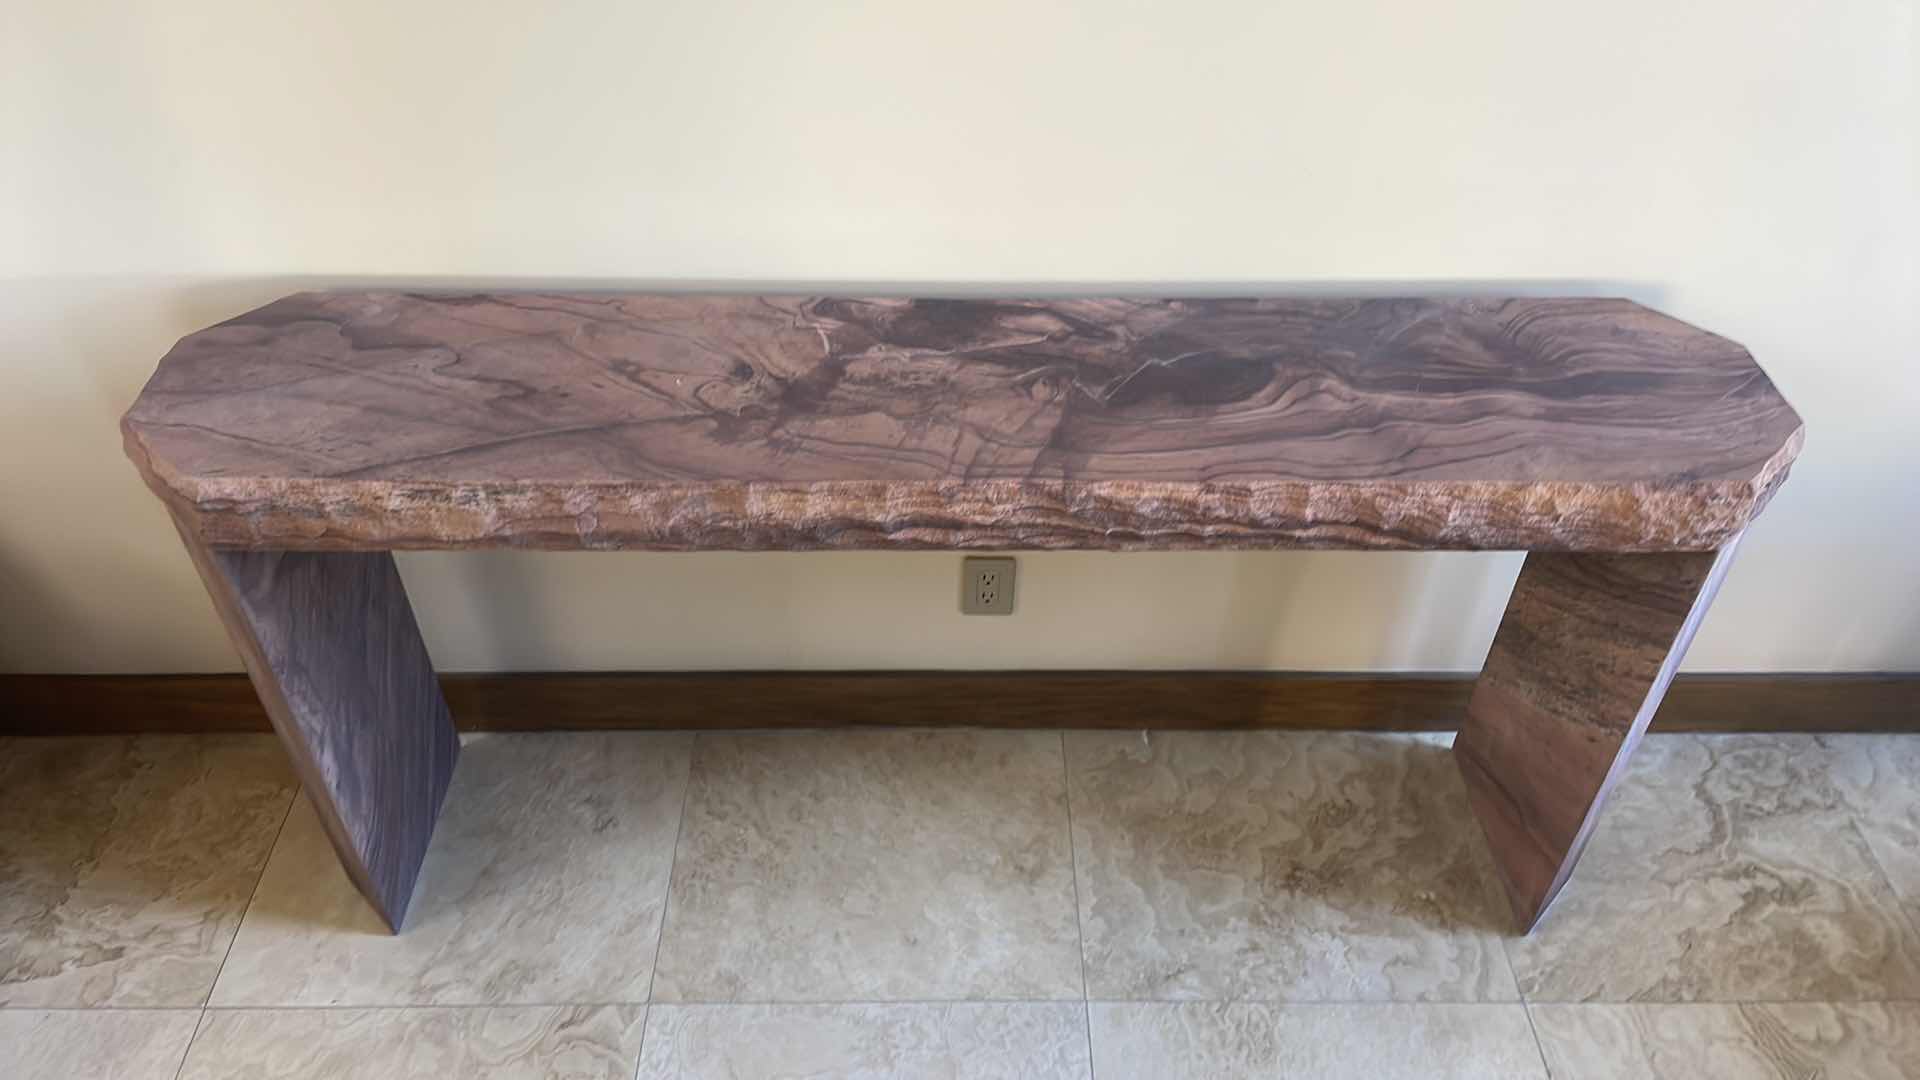 Photo 1 of SPECIALITY CUT RAINBOW GOLD CUSTOM TABLE 4” THICK 72” X 14” H34” CHISELED EDGING AND HONED TOP LEGS ARE SPECIAL CUT ANGLE WITH HONED FINISH